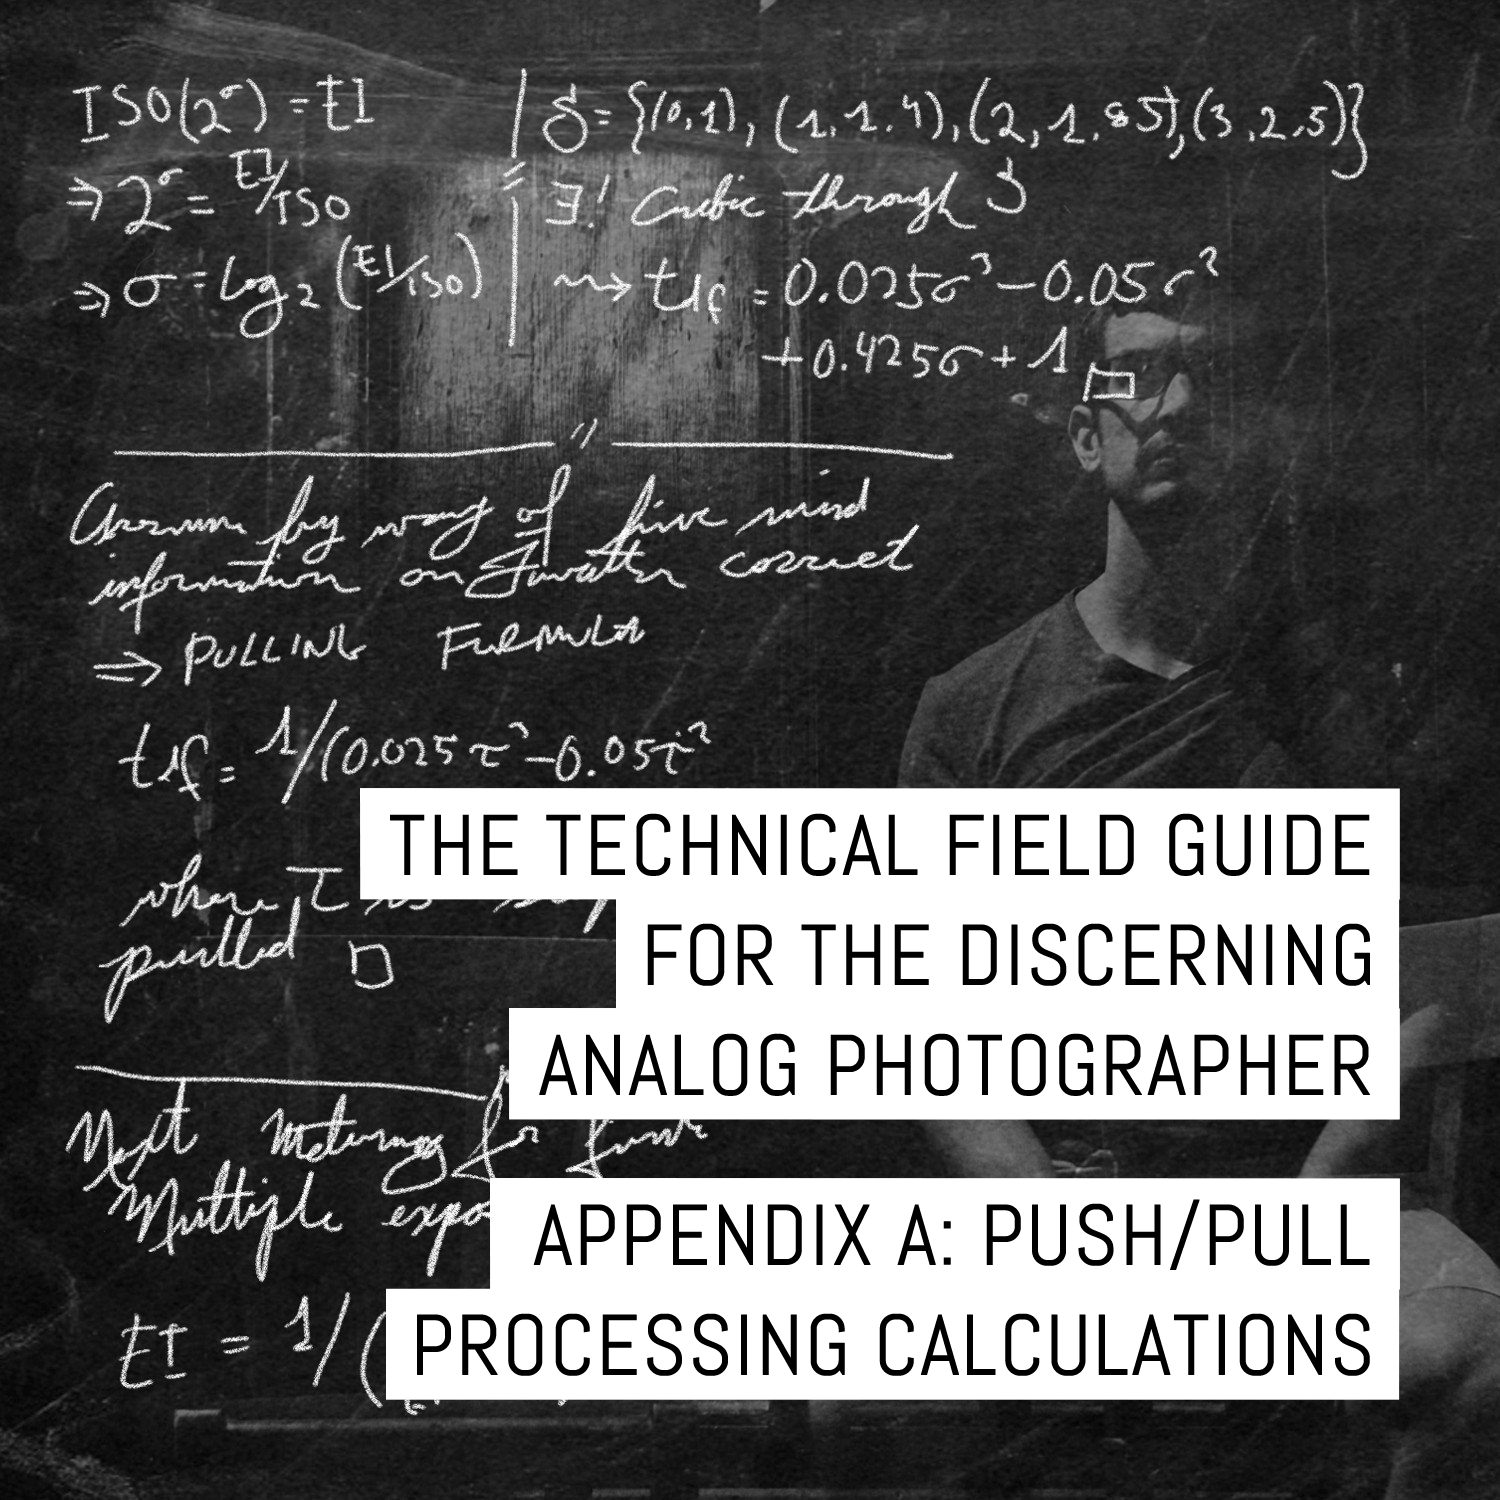 Appendix A of the Technical Field Guide for the Discerning Analog Photographer: push/pull processing calculations